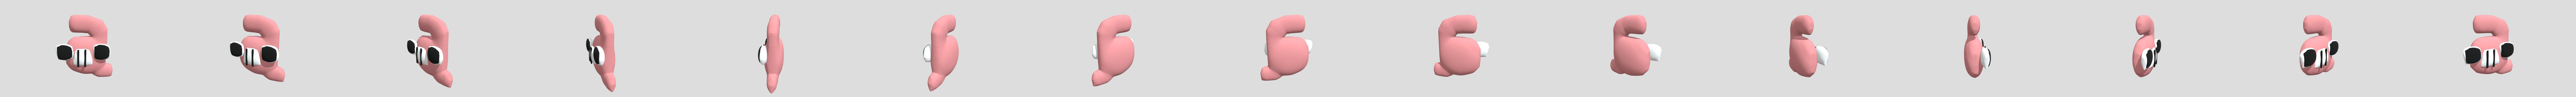 Baby B (Alphabet Lore) - Download Free 3D model by aniandronic  (@aniandronic) [4adceef]